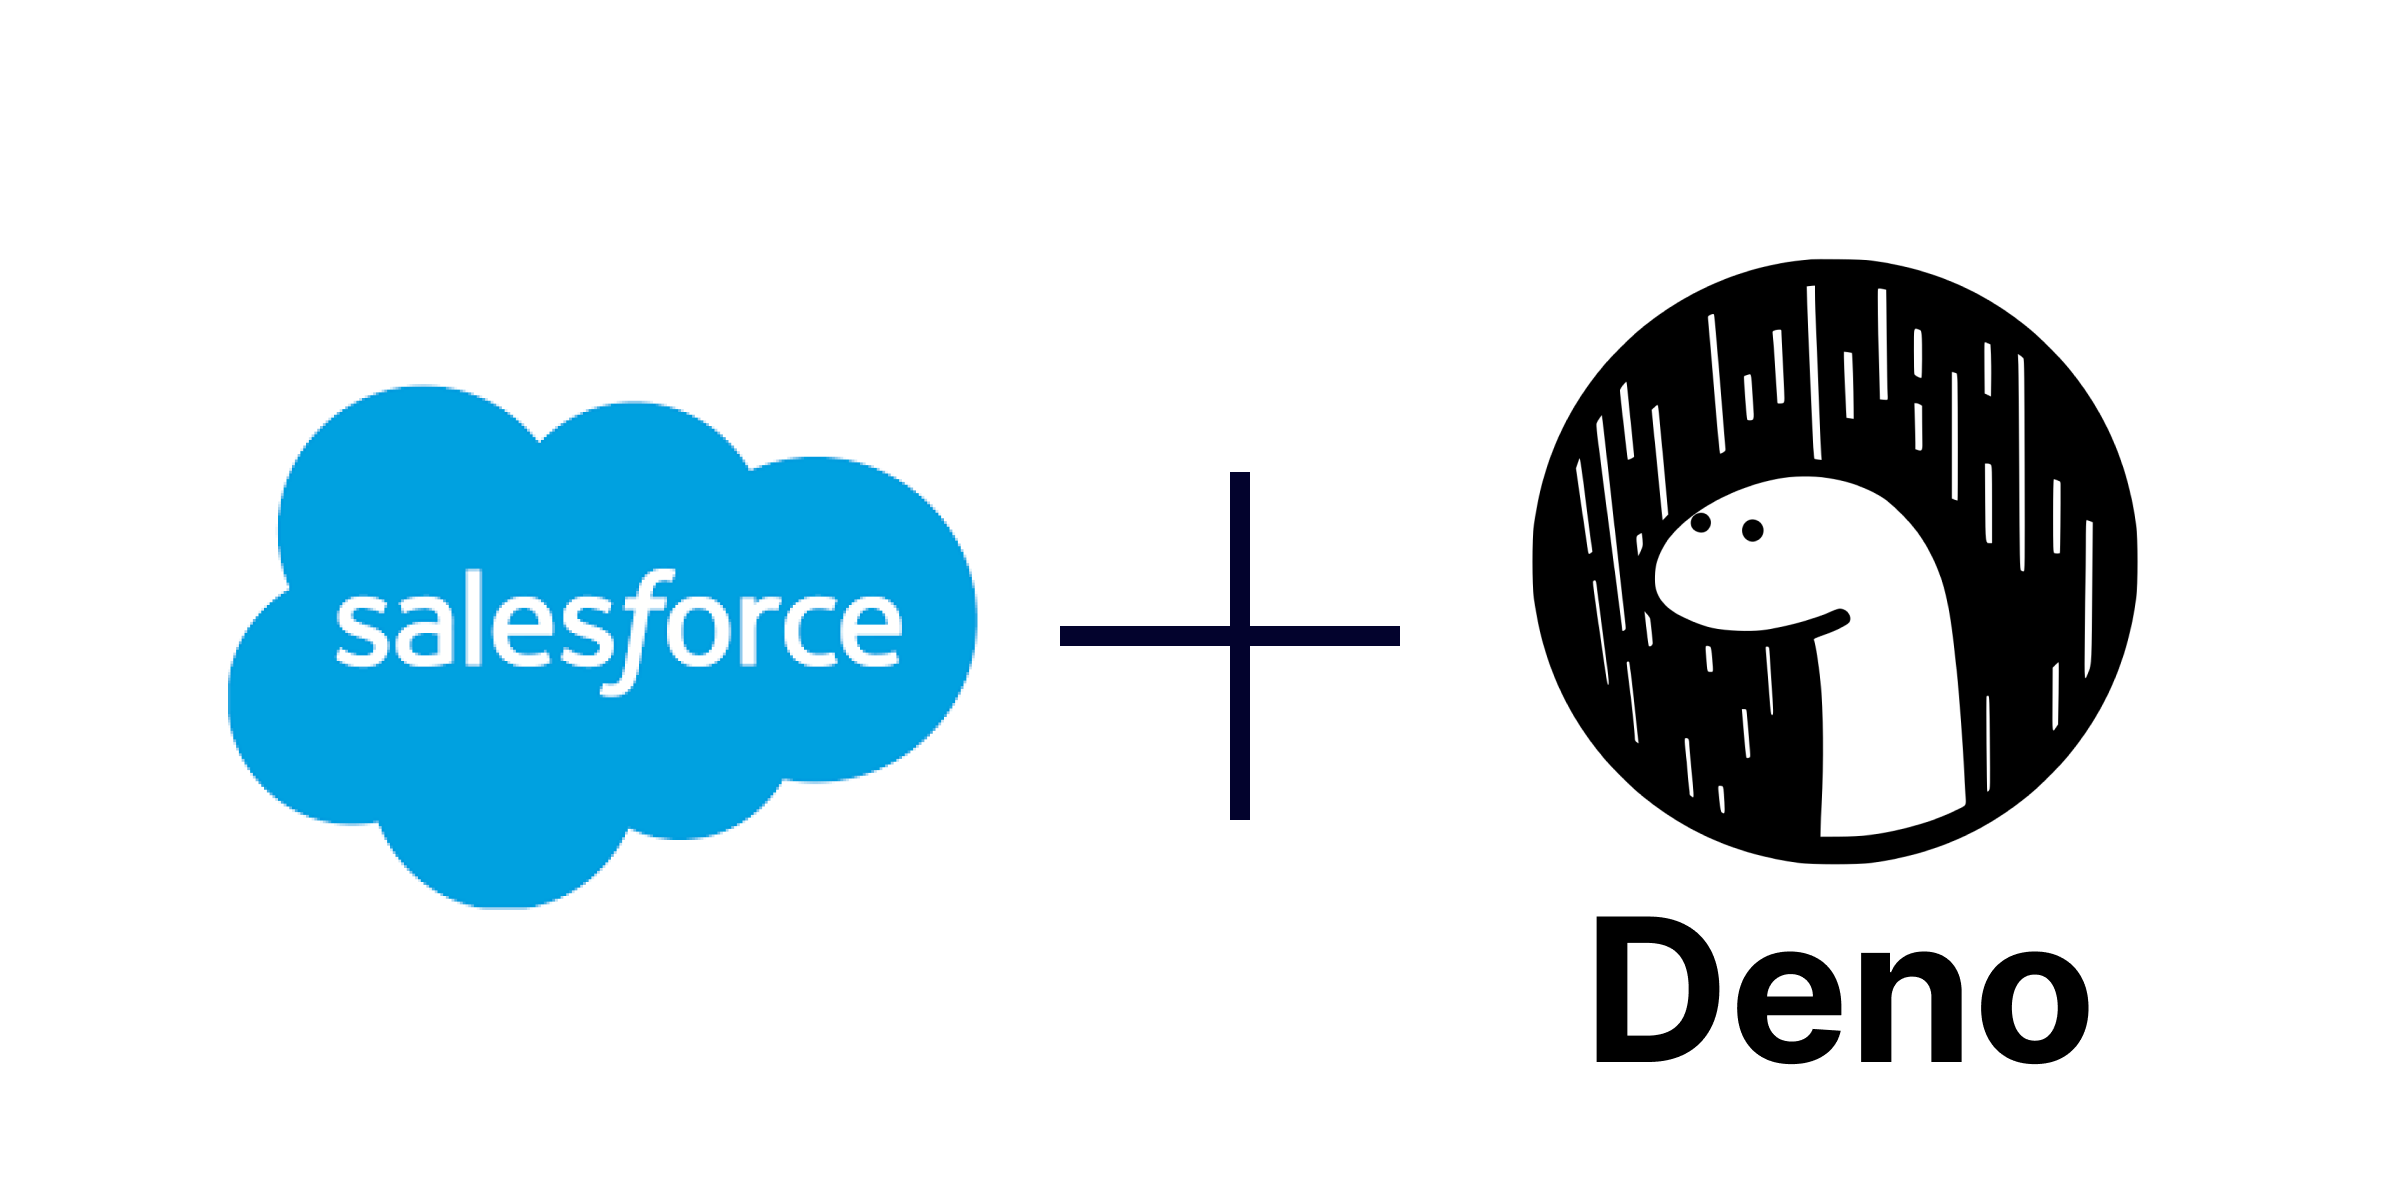 How to Receive Updates from Salesforce in Your Deno Application